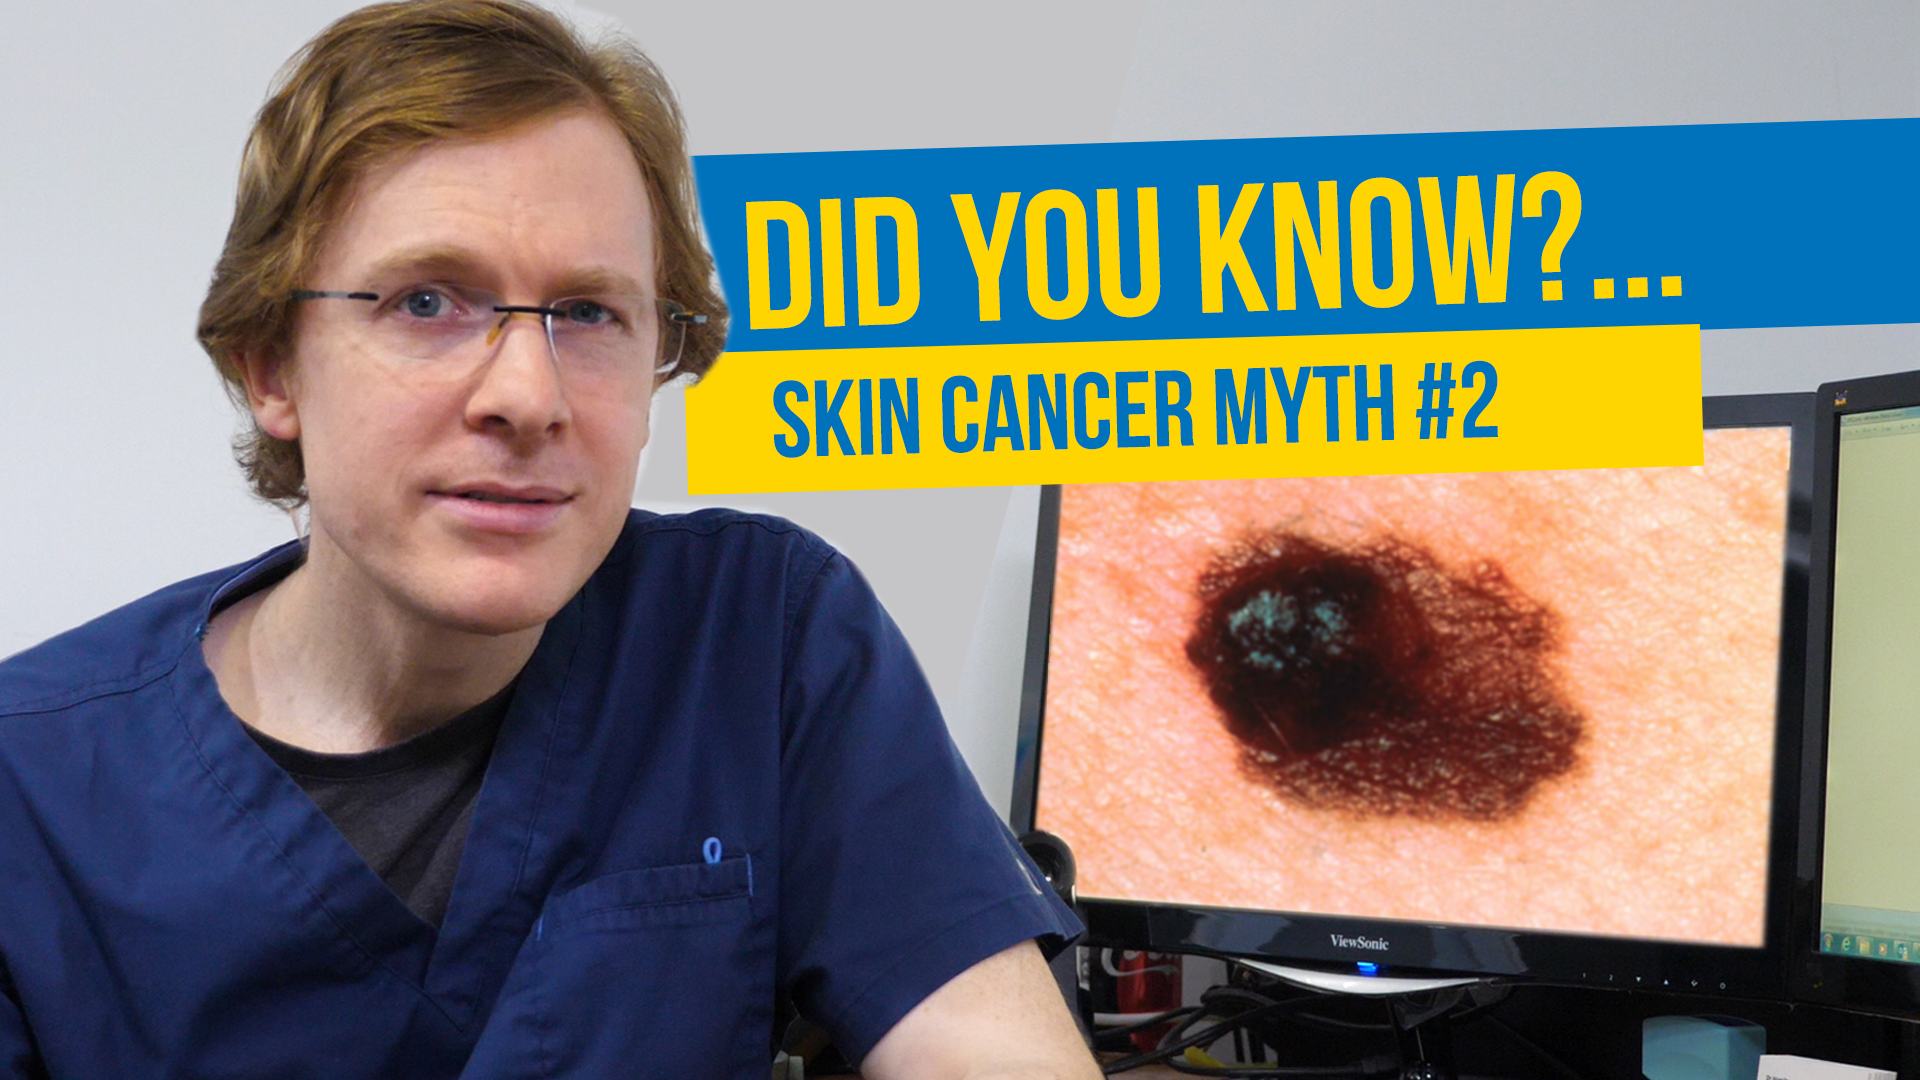 MYTH: Having tanned or dark skin protects you from skin cancer